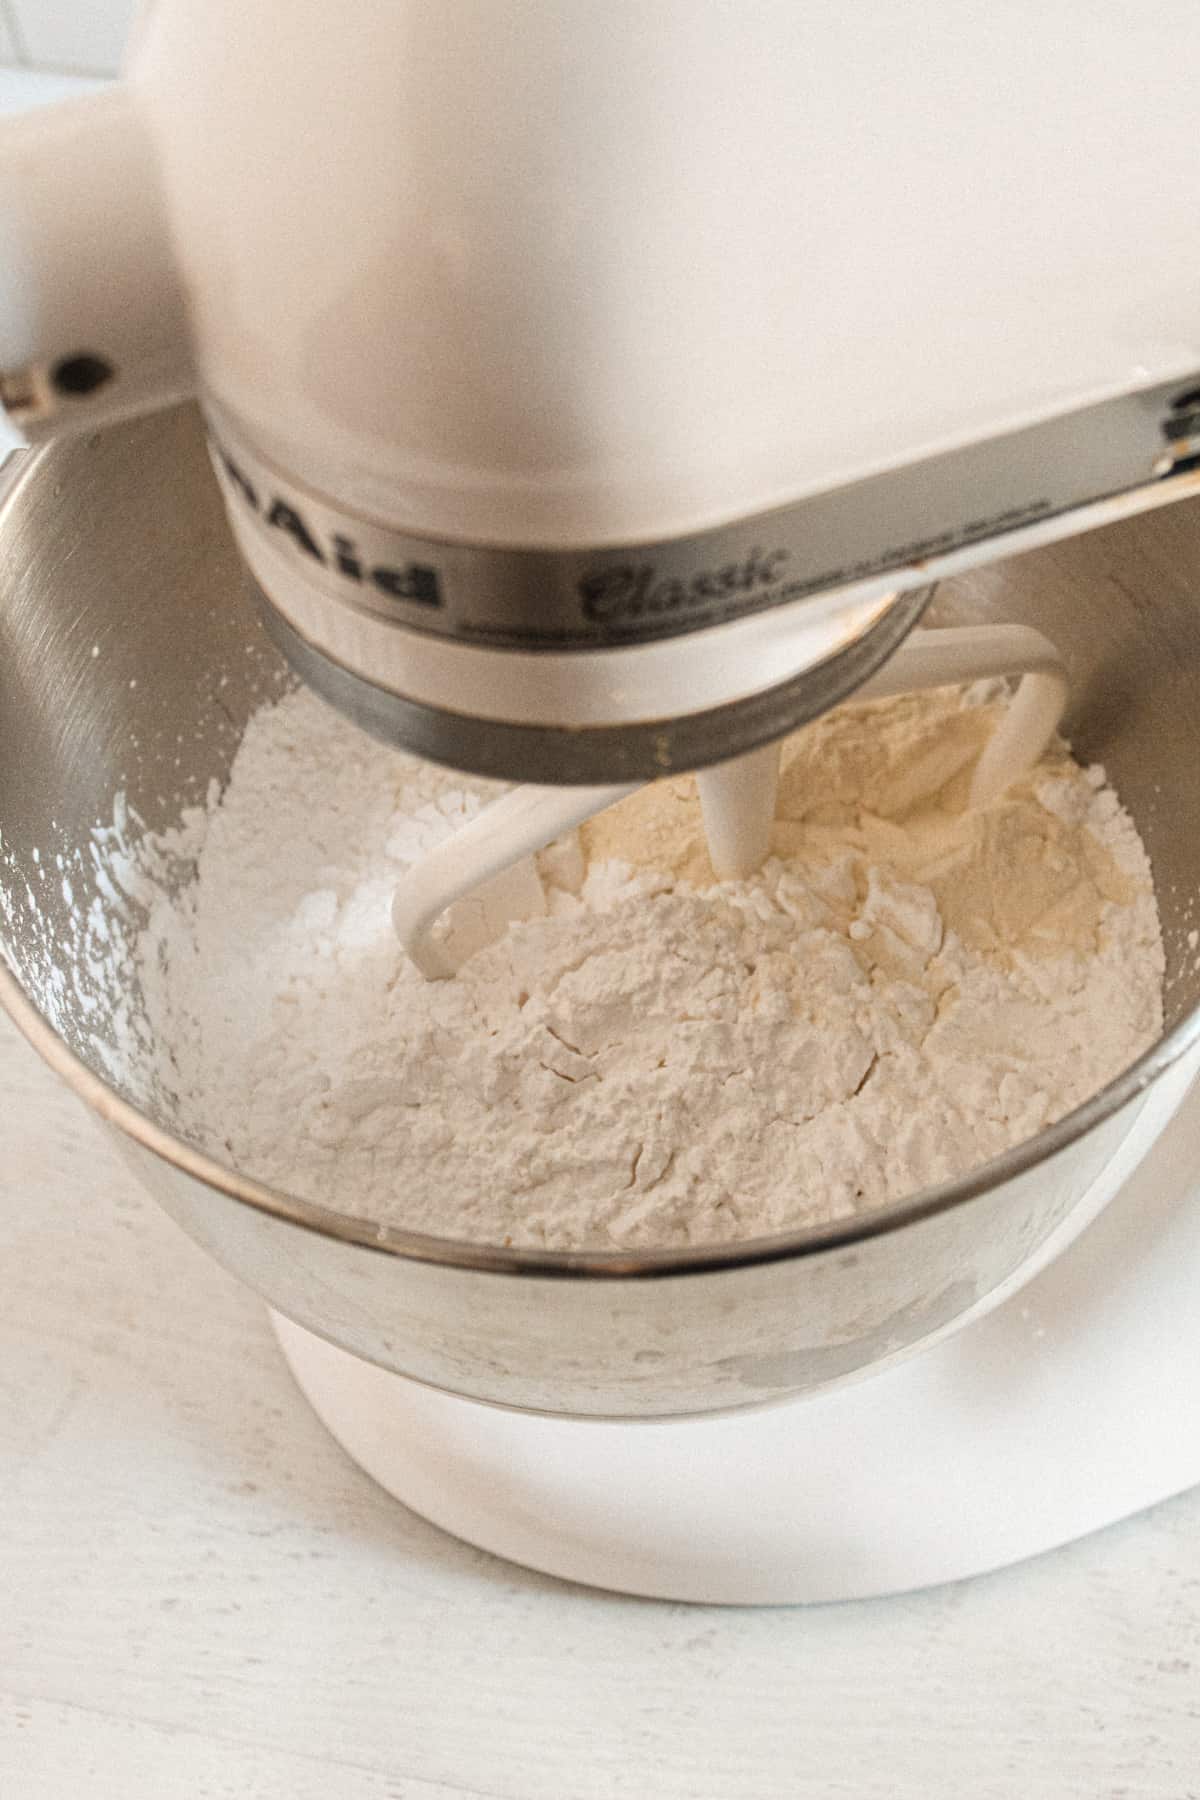 mixing flour blend with a stand mixer.